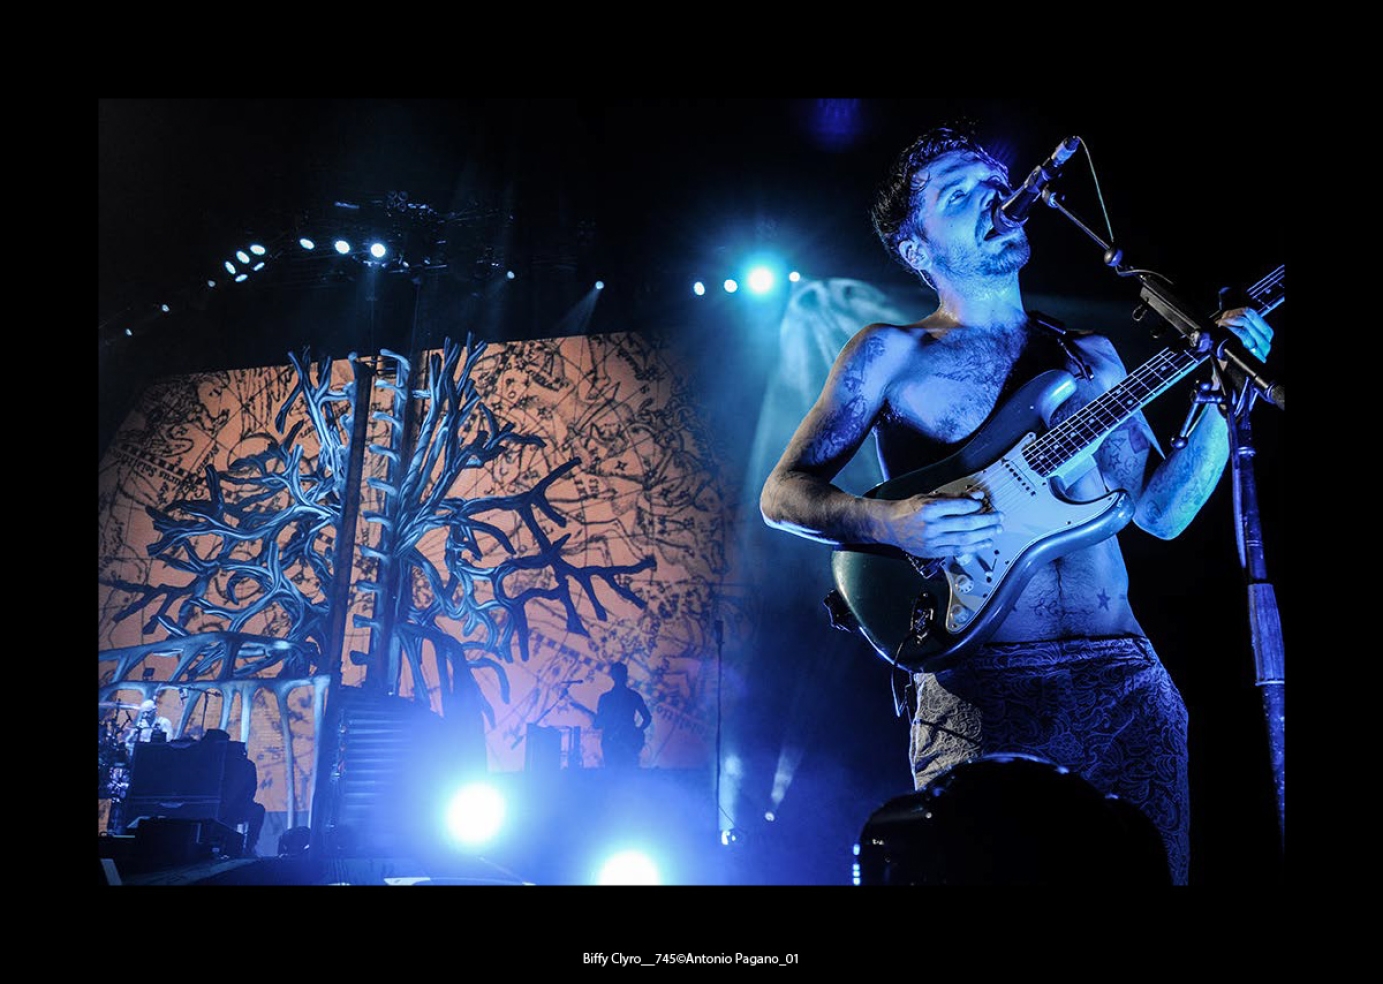 Photography for Biffy Clyro by Antonio Pagano